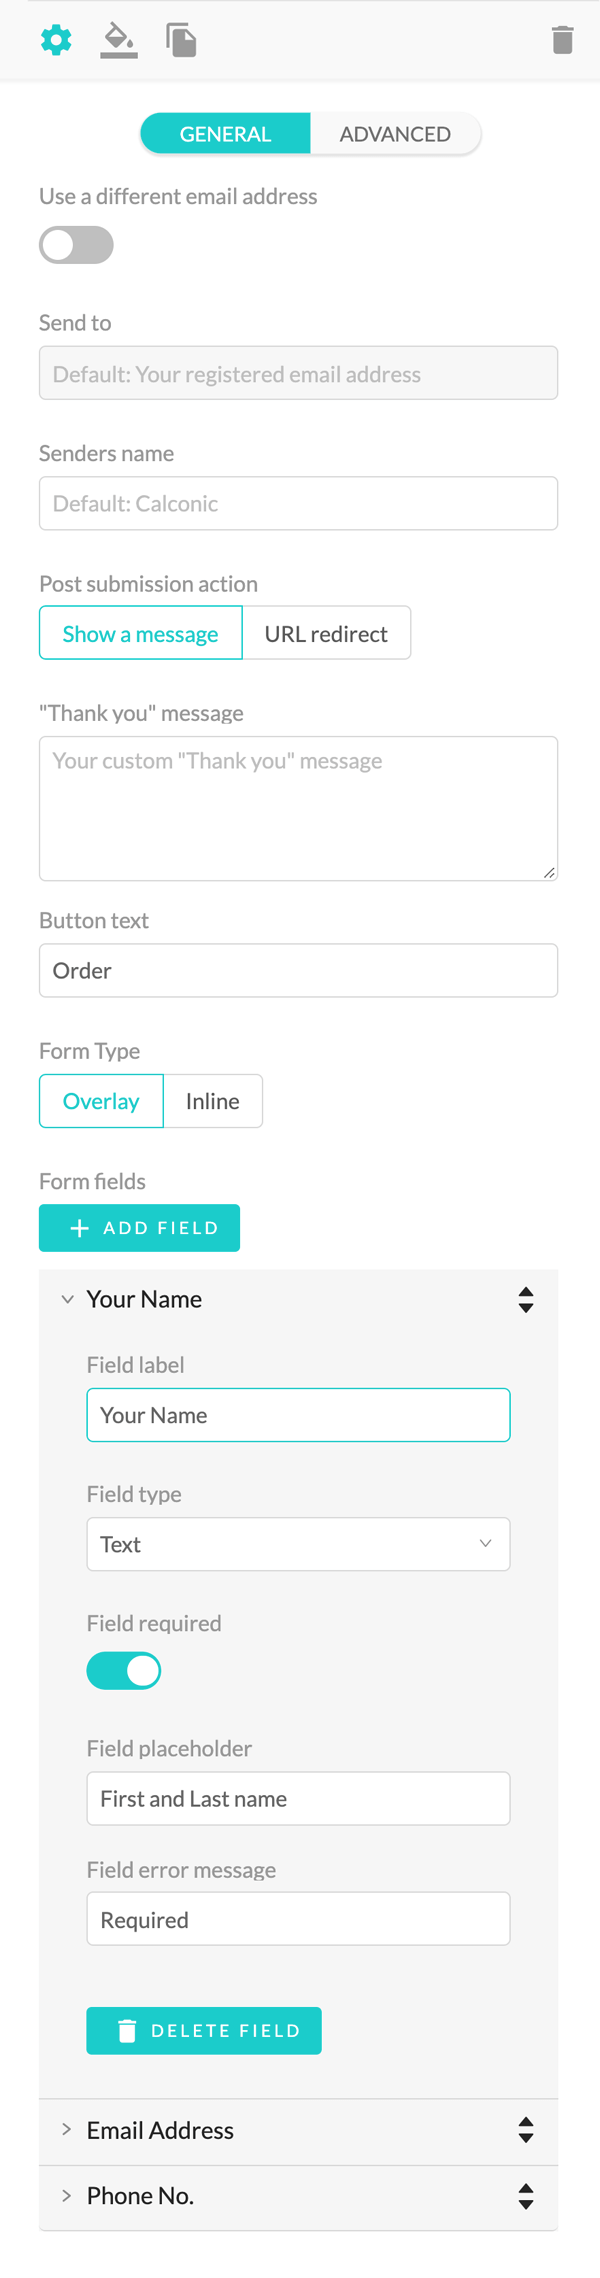 Customizing the Order Form tool